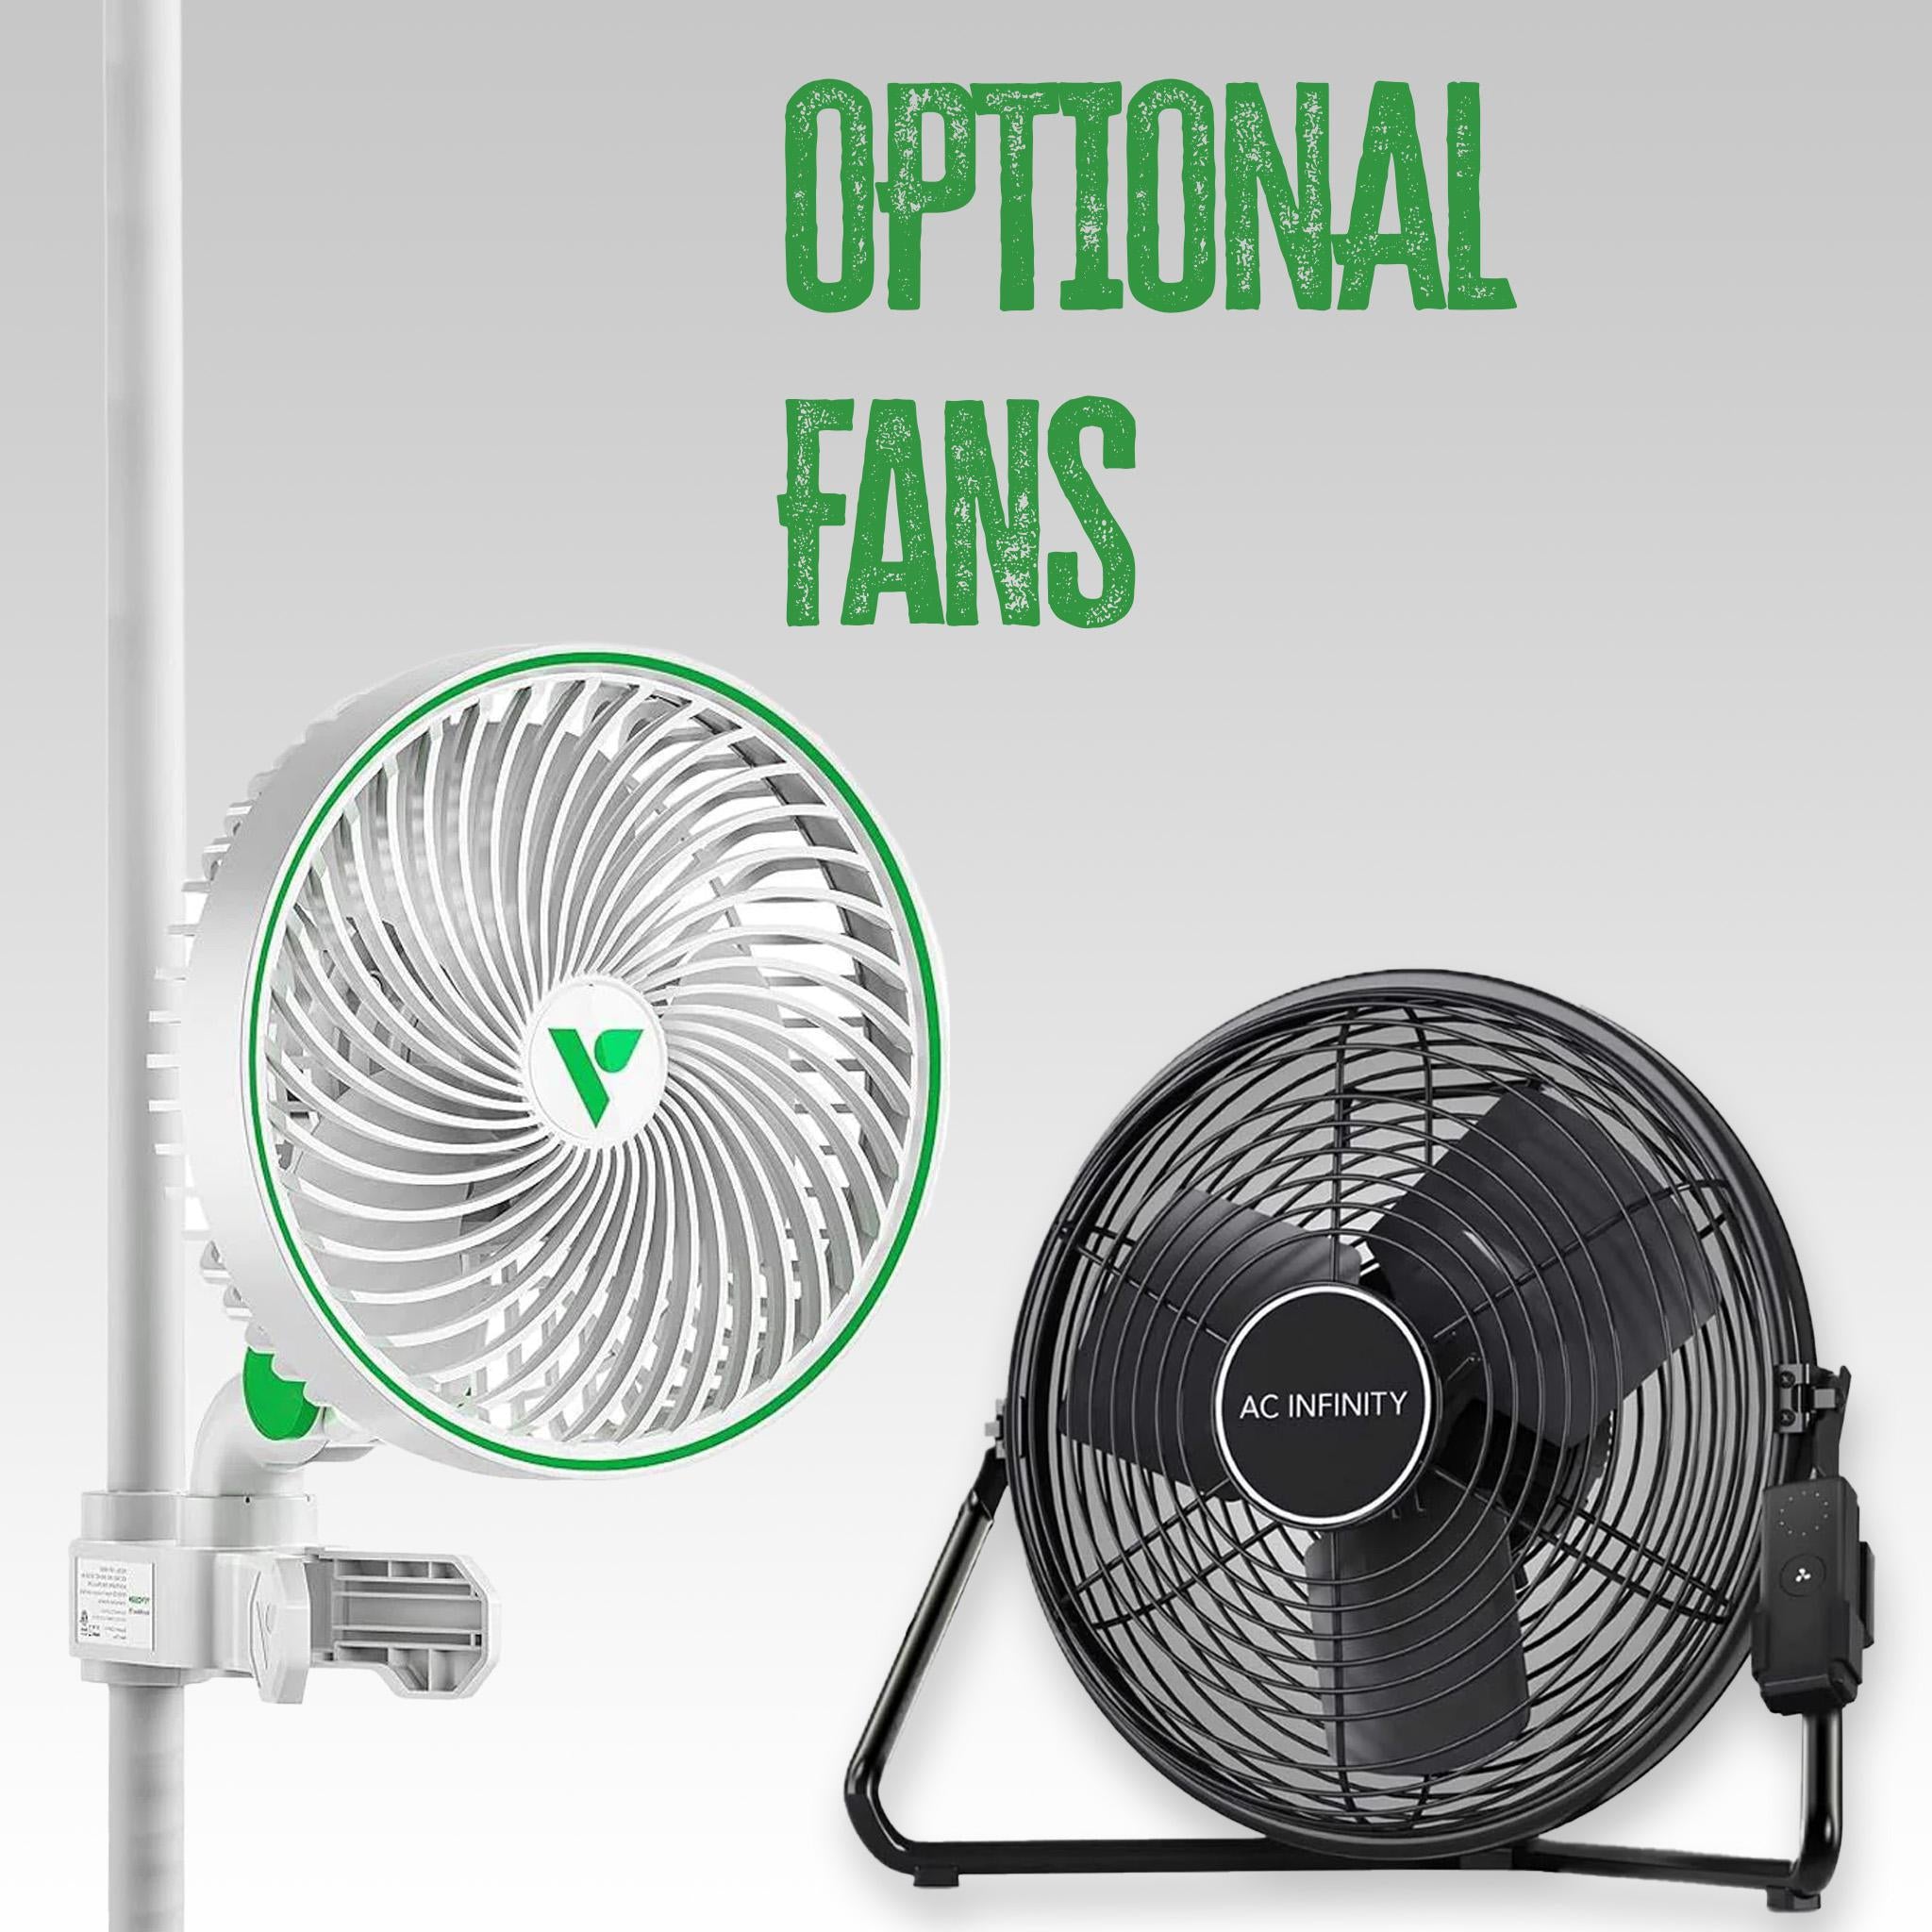 drying package optional fans